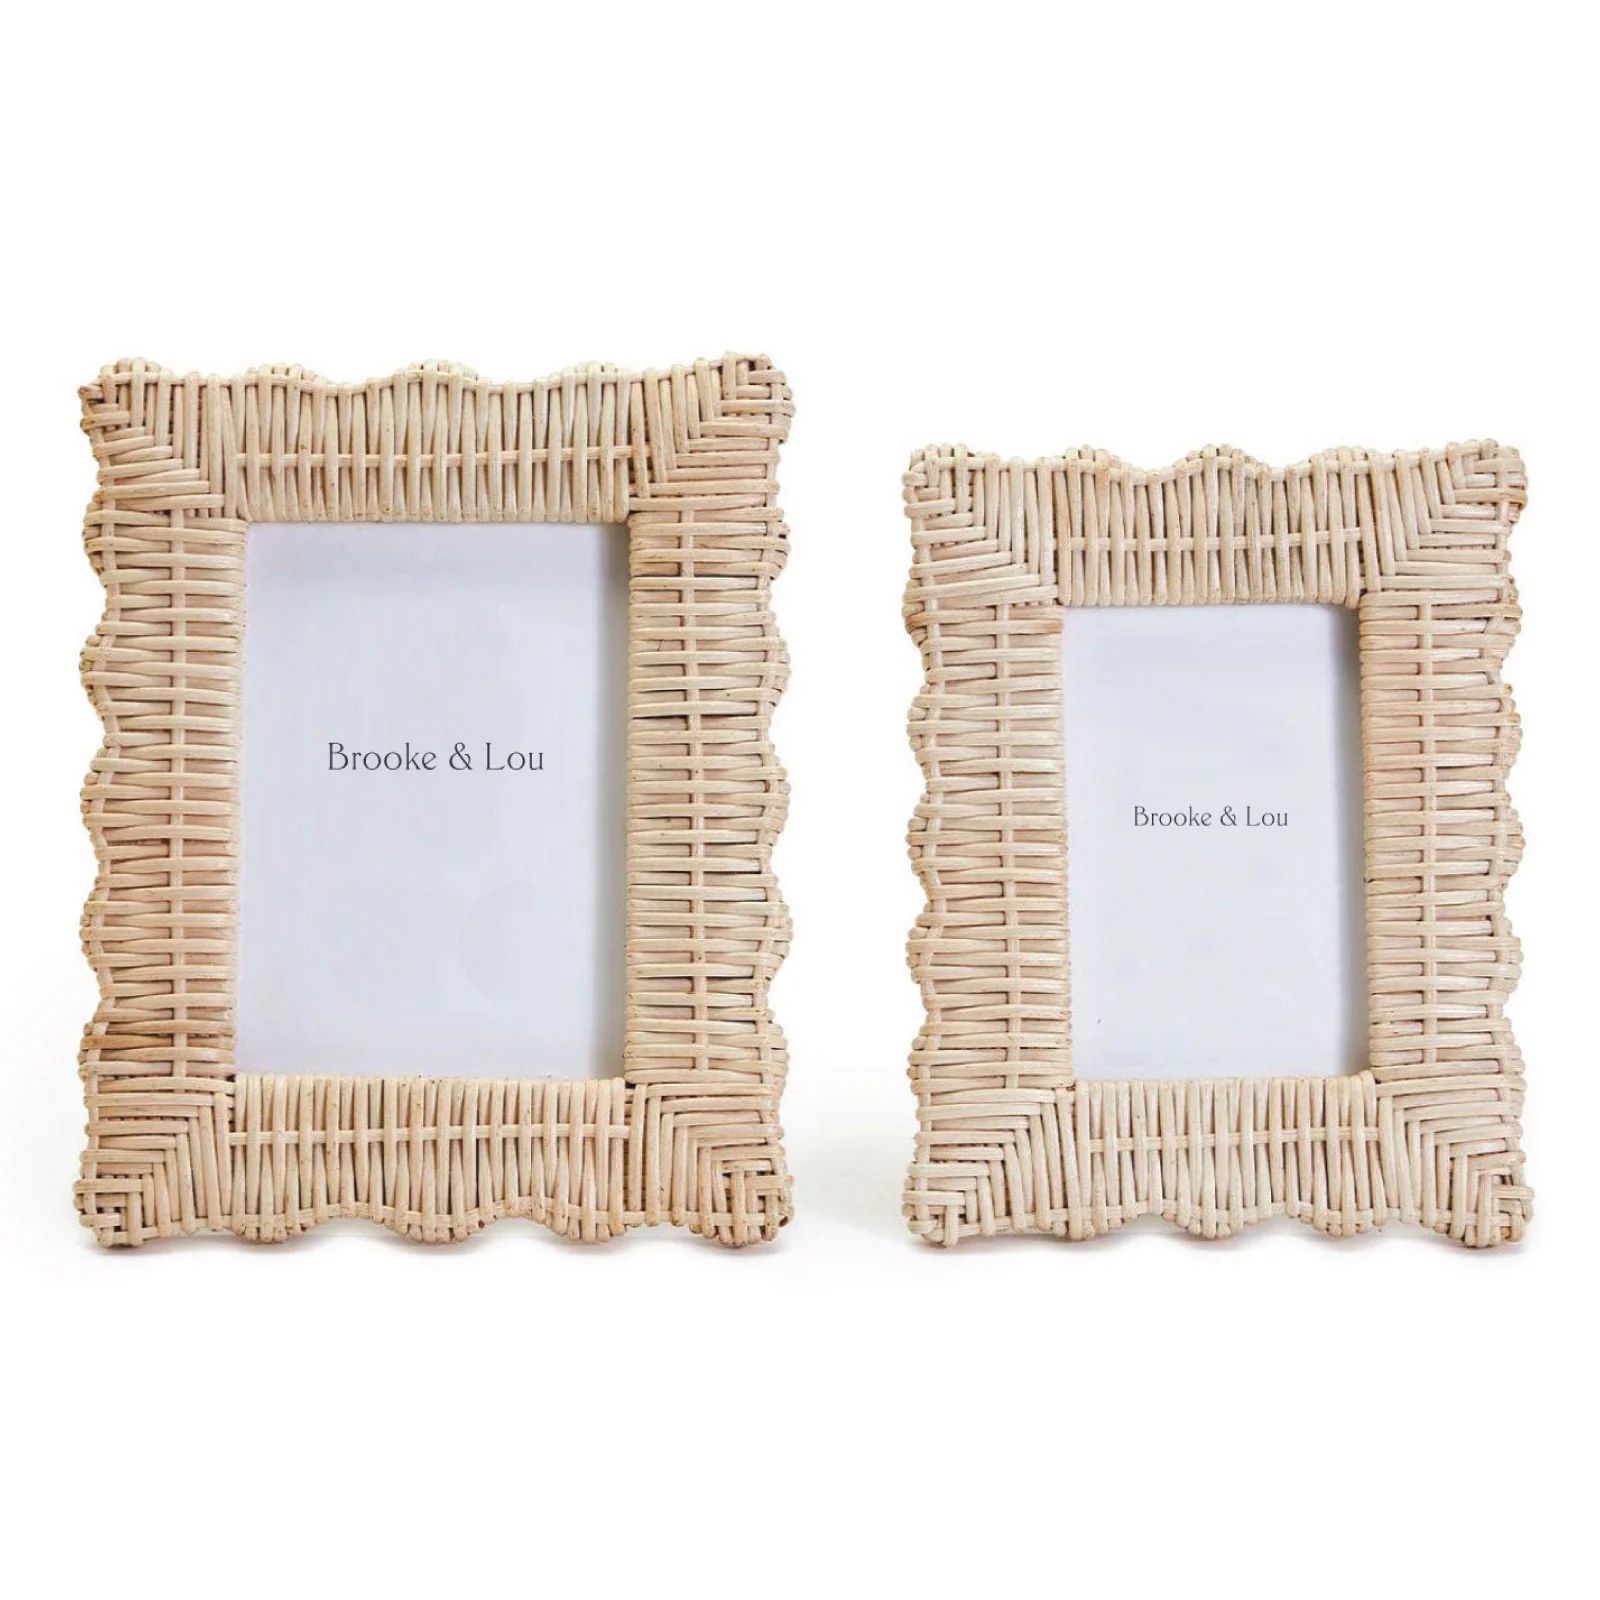 Scalloped Wicker Frame Set | Brooke and Lou